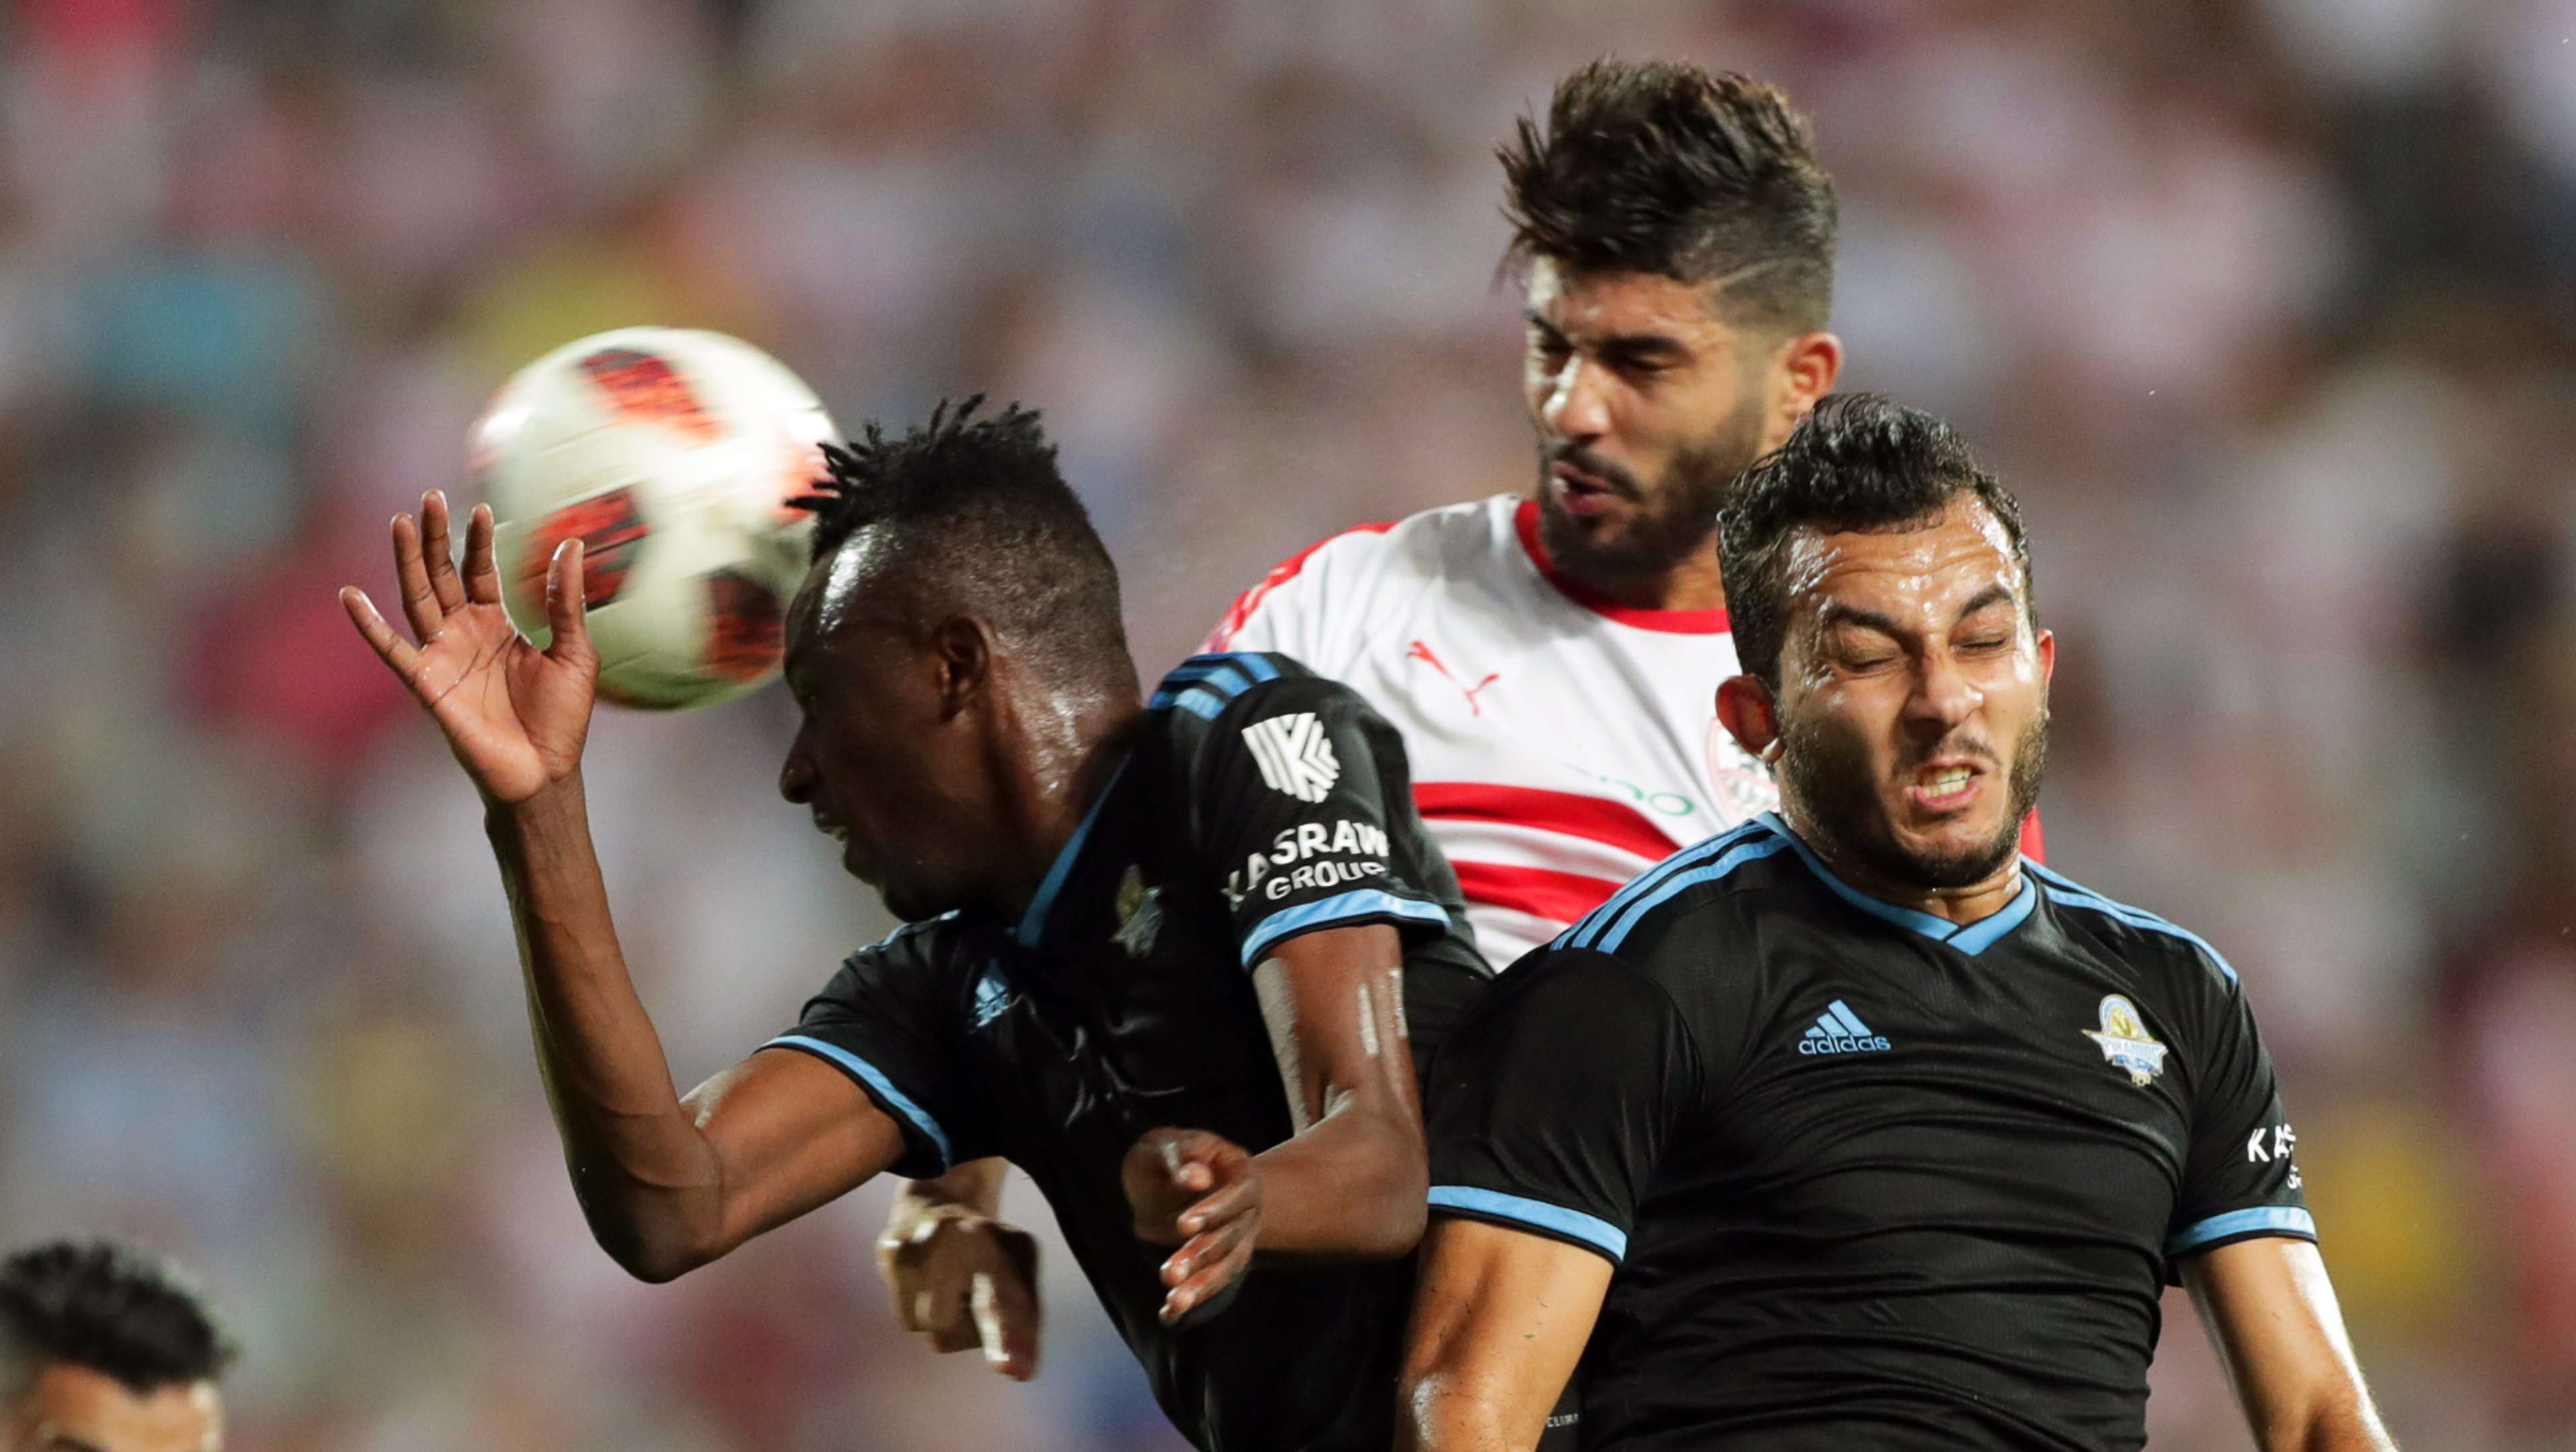 Eric Traore and Ahmed Ayman Mansour of Pyramds vs Zamalek